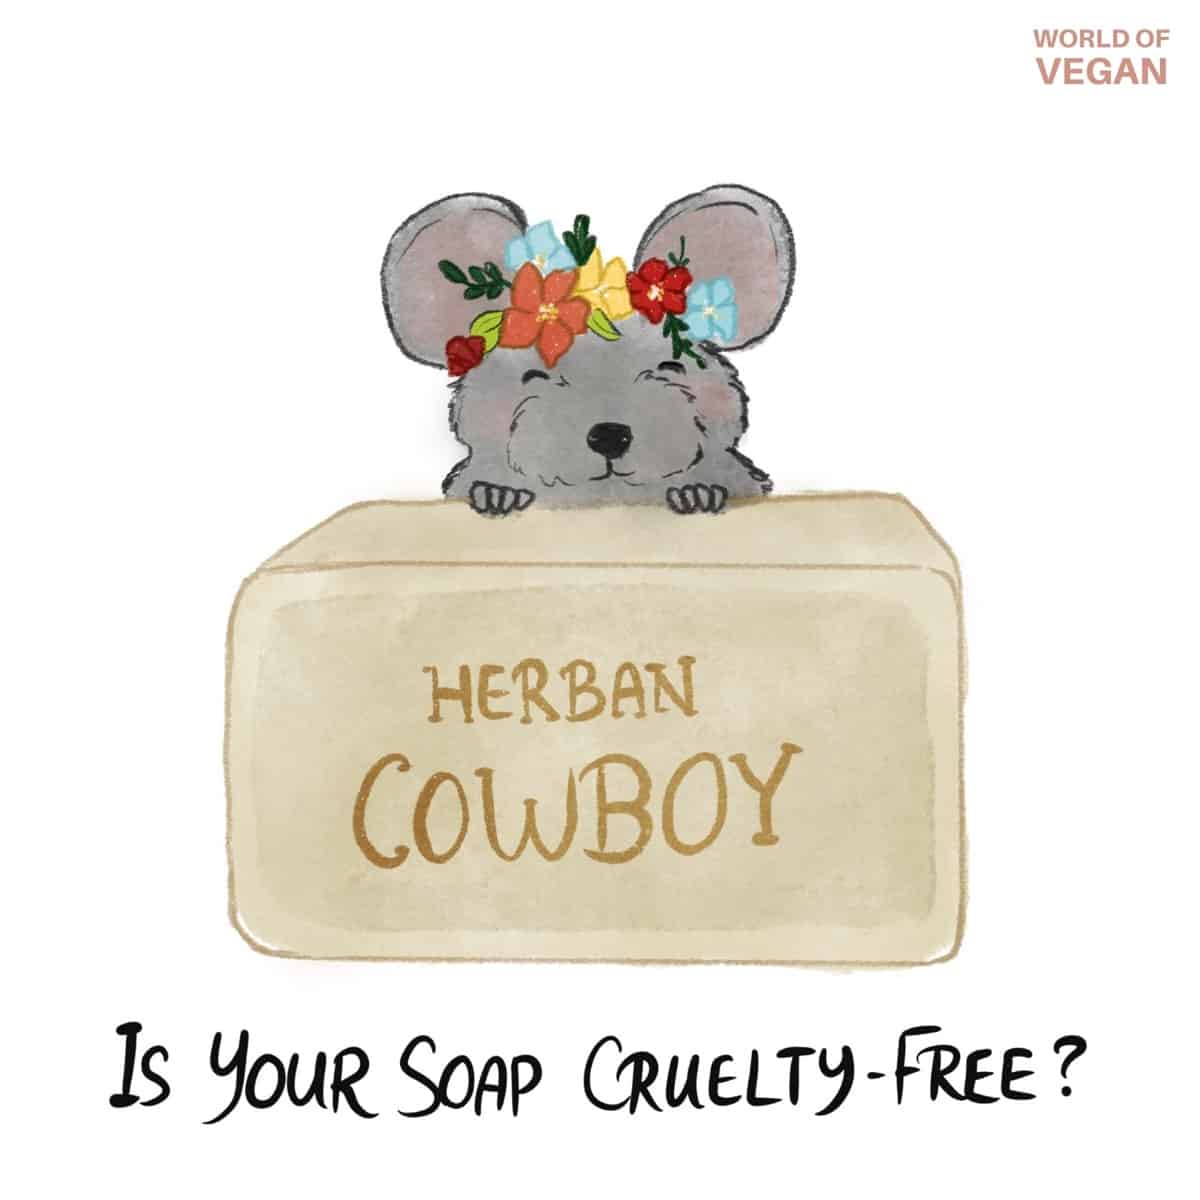 Illustration of vegan soap from Herban Cowboy brand with a cute cruelty-free mouse peeking over the top. 